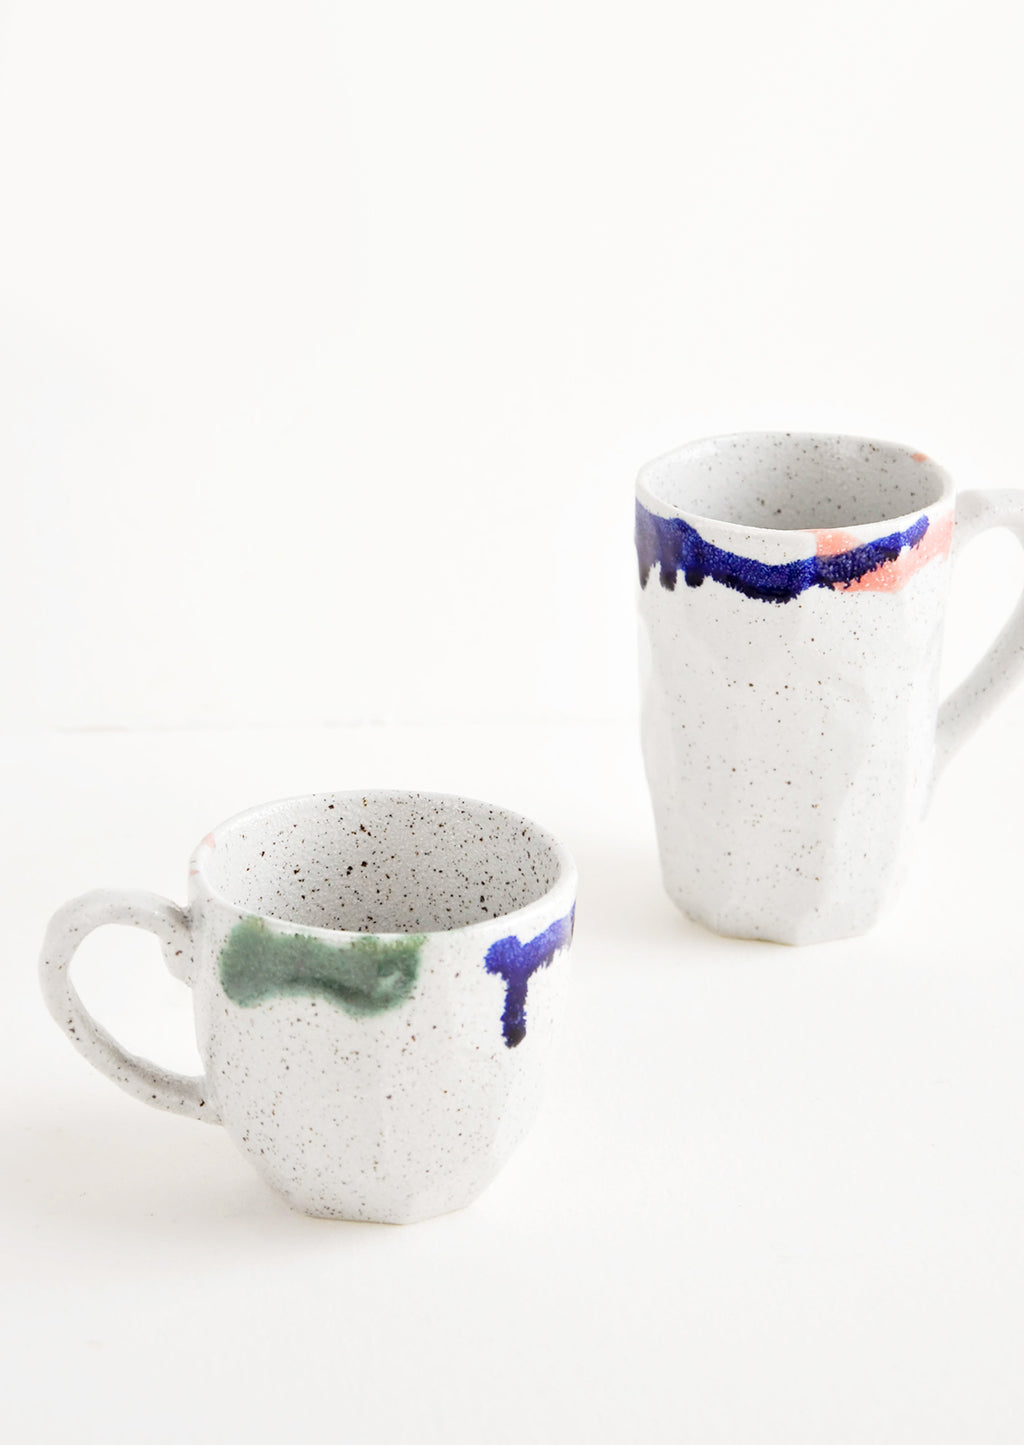 1: Two differently sized gray ceramic mugs with blue, green, and pink painted rims.